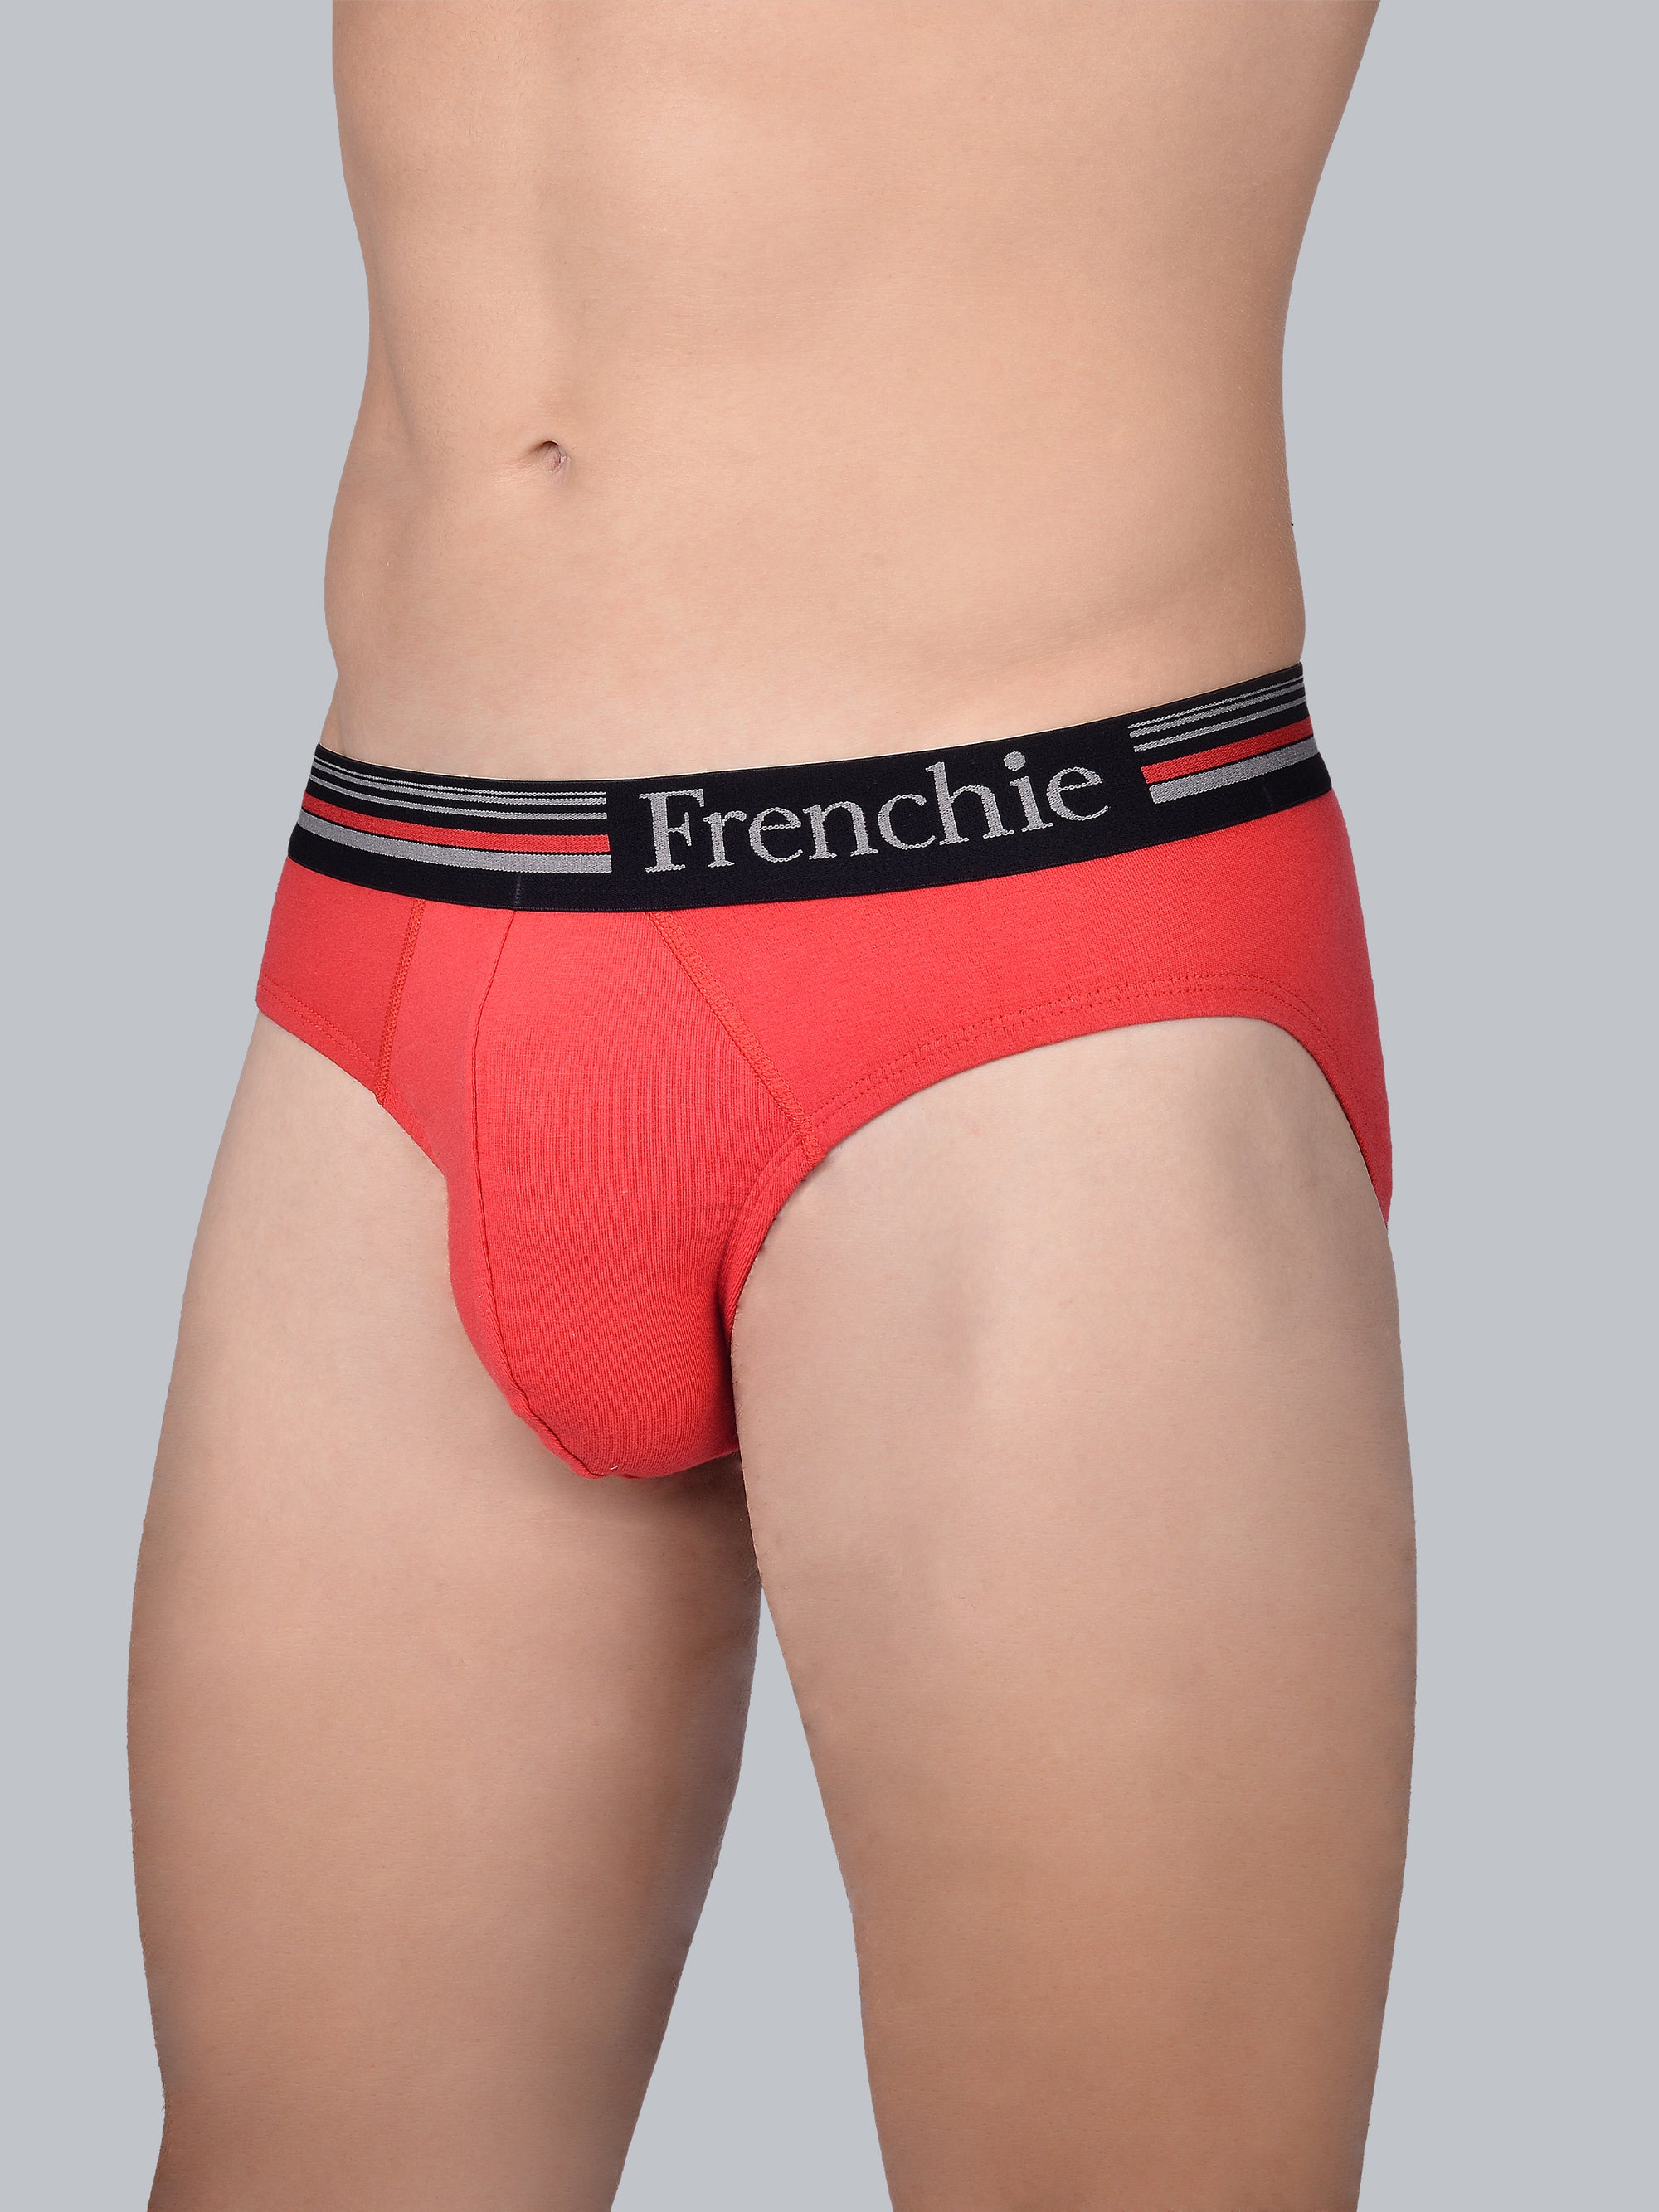 Frenchie Mens Casual-4000 Brief Assorted Colors – VIP Clothing Limited